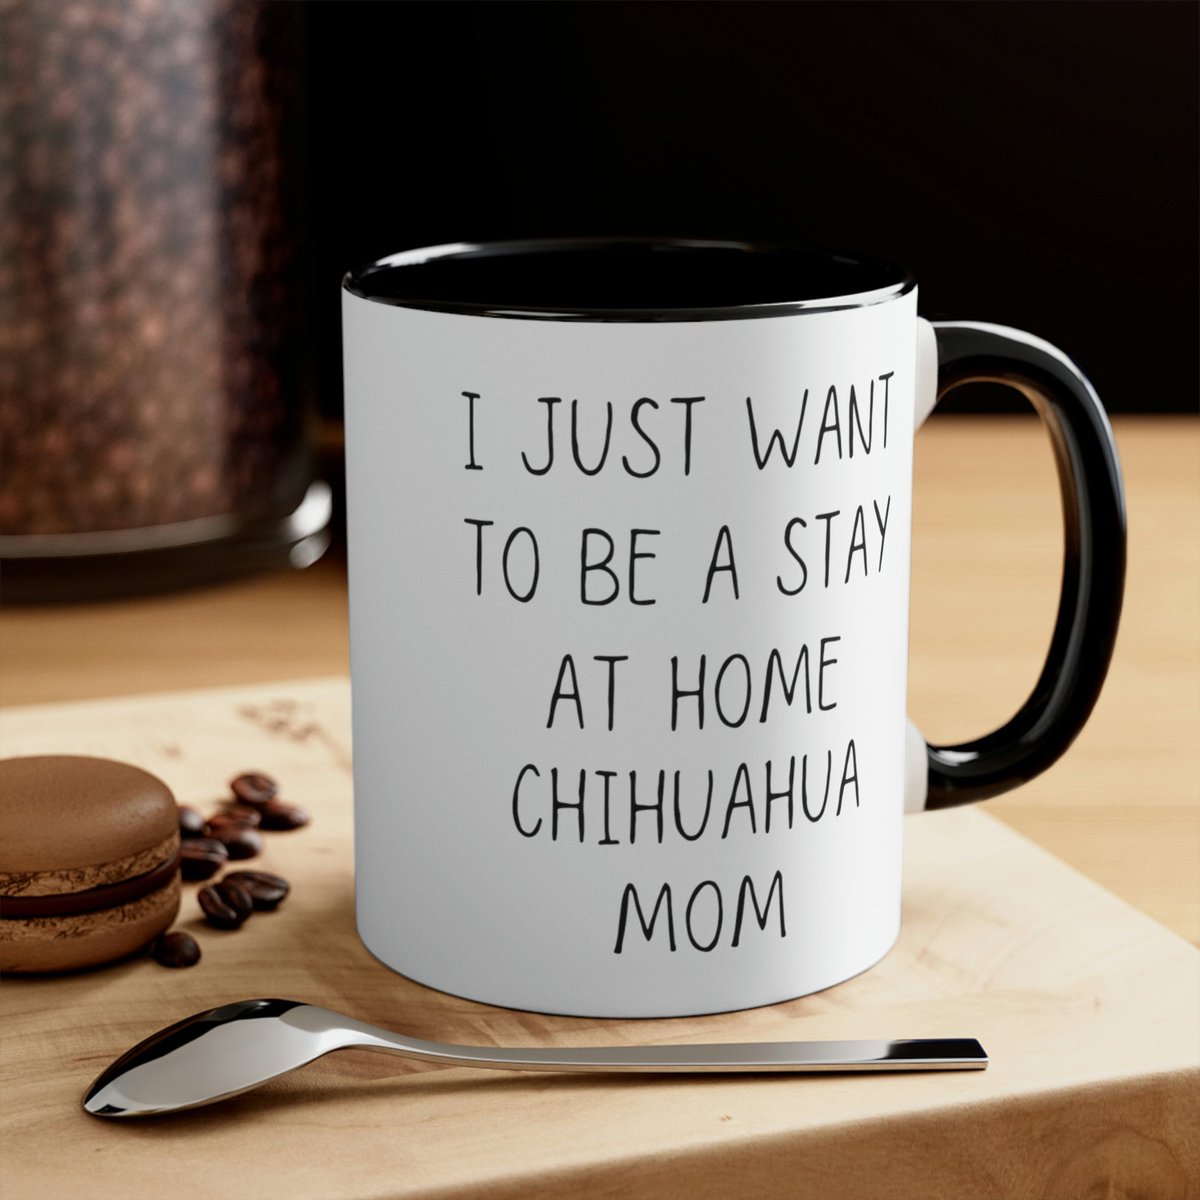 Funny Chihuahua Mom Gift Mug #chihuahua #chihuahuadog #chihuahuagift #chihuahuamotherday #chihuahuamom #chihuahuabirthday #chihuahuamothersdaygift #chihuahuamug CLICK HERE TO BUY NOW: etsy.me/3AfnVTF